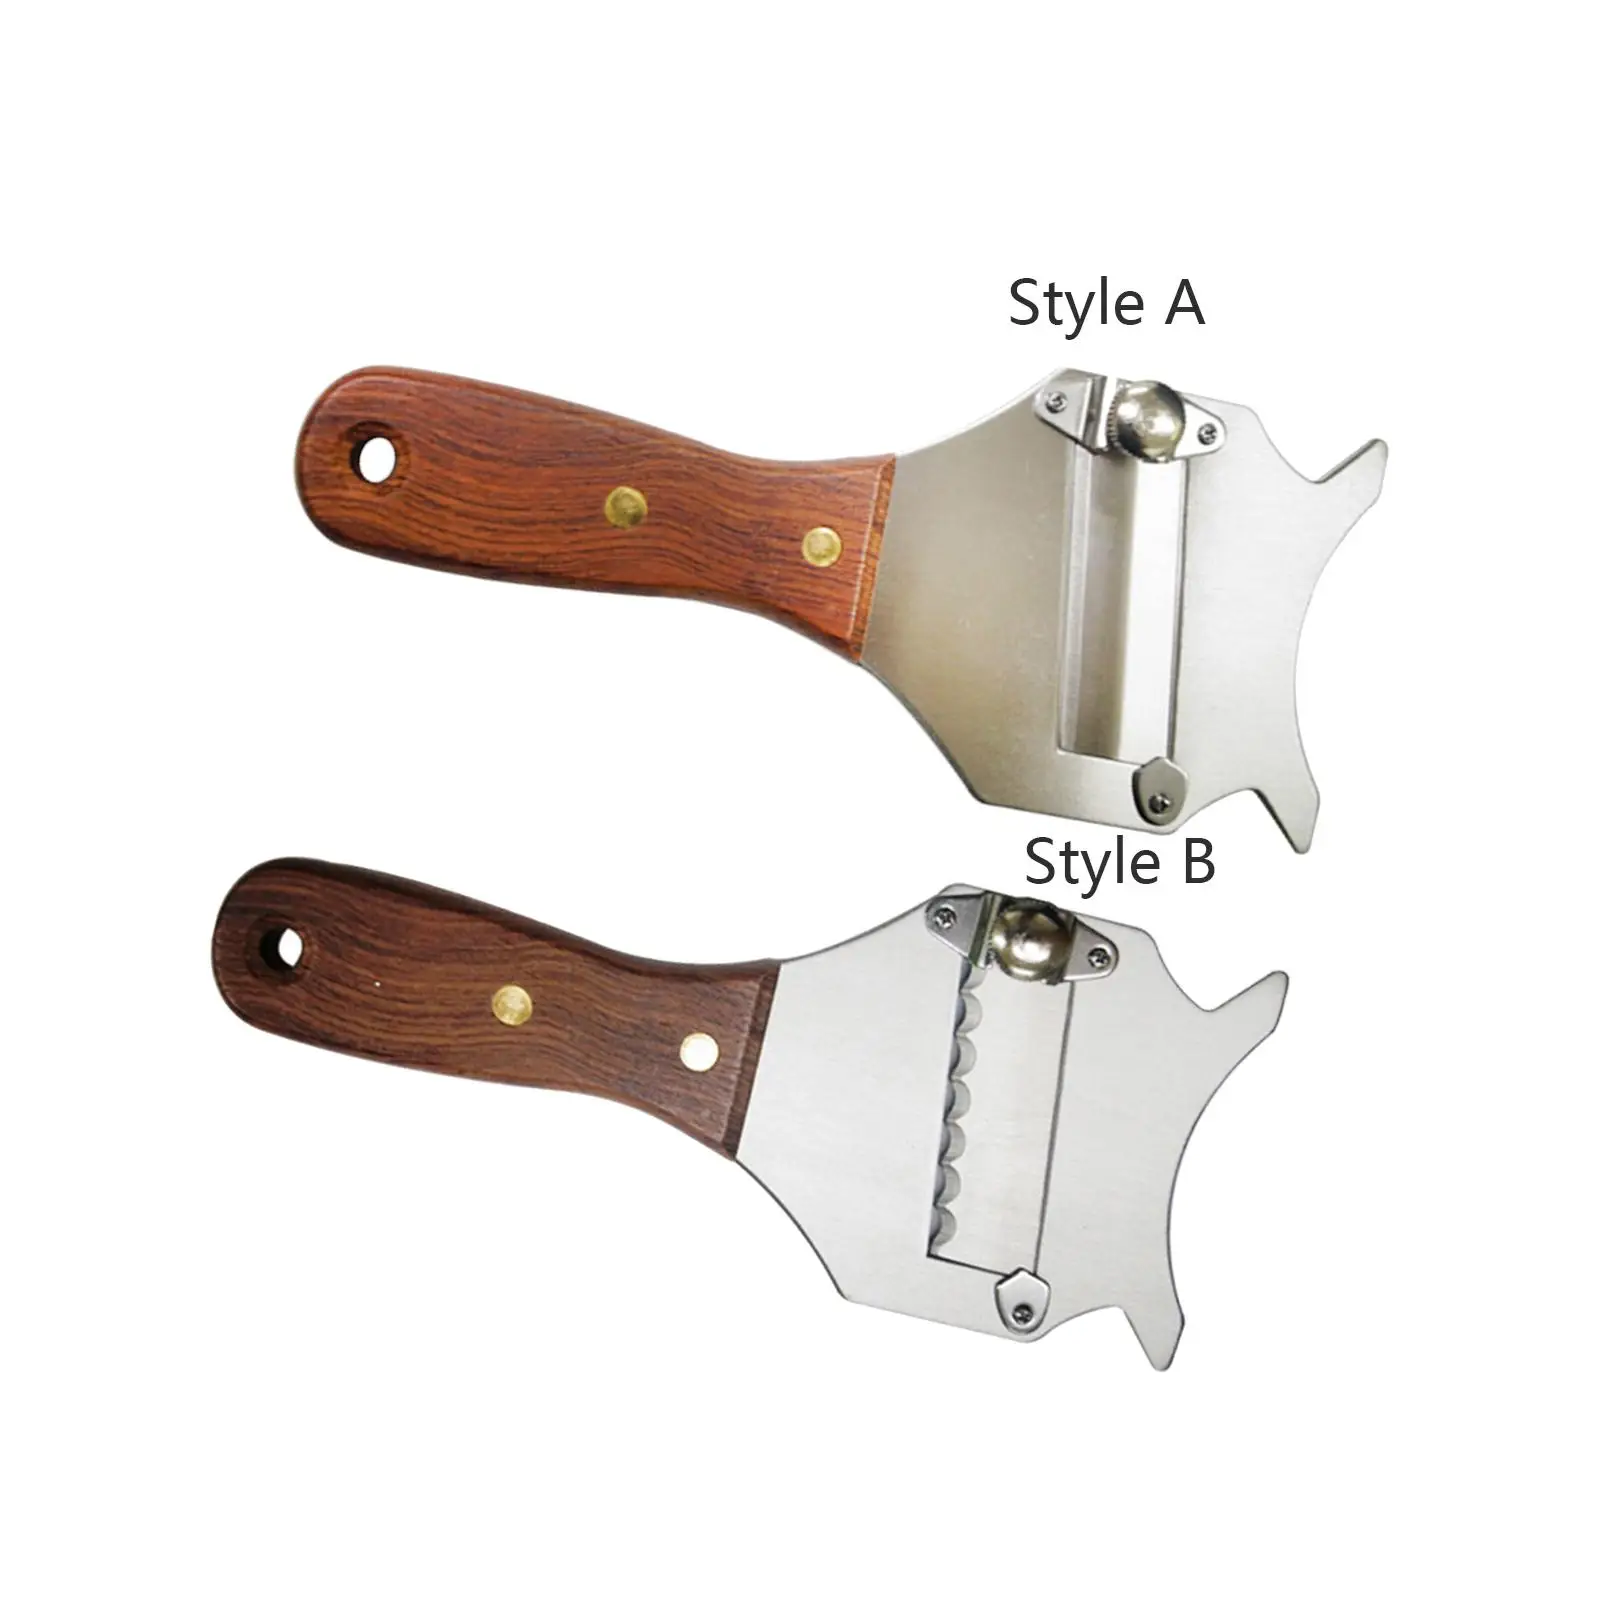 Professional Cheese Chocolate Slicer with Wood Handle Household Baking Tools